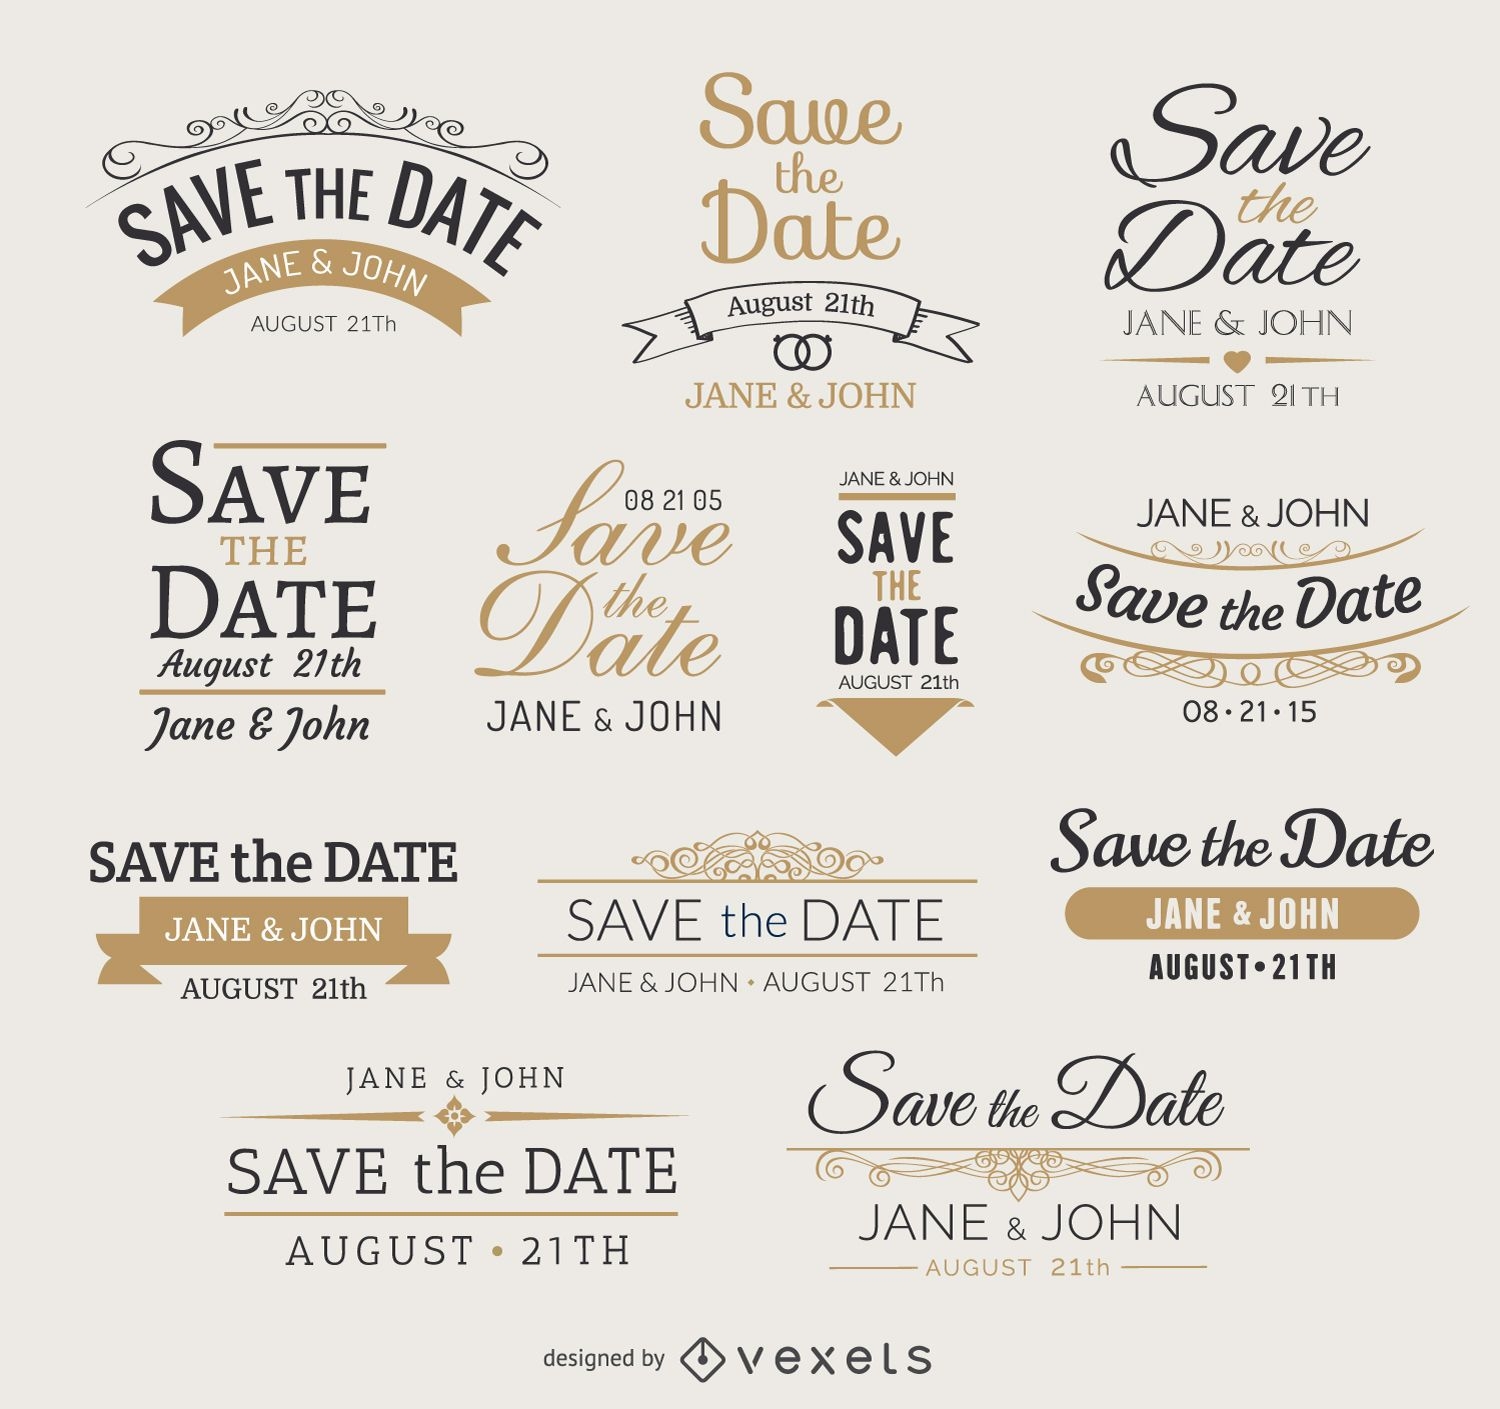 Save the Date Emblems